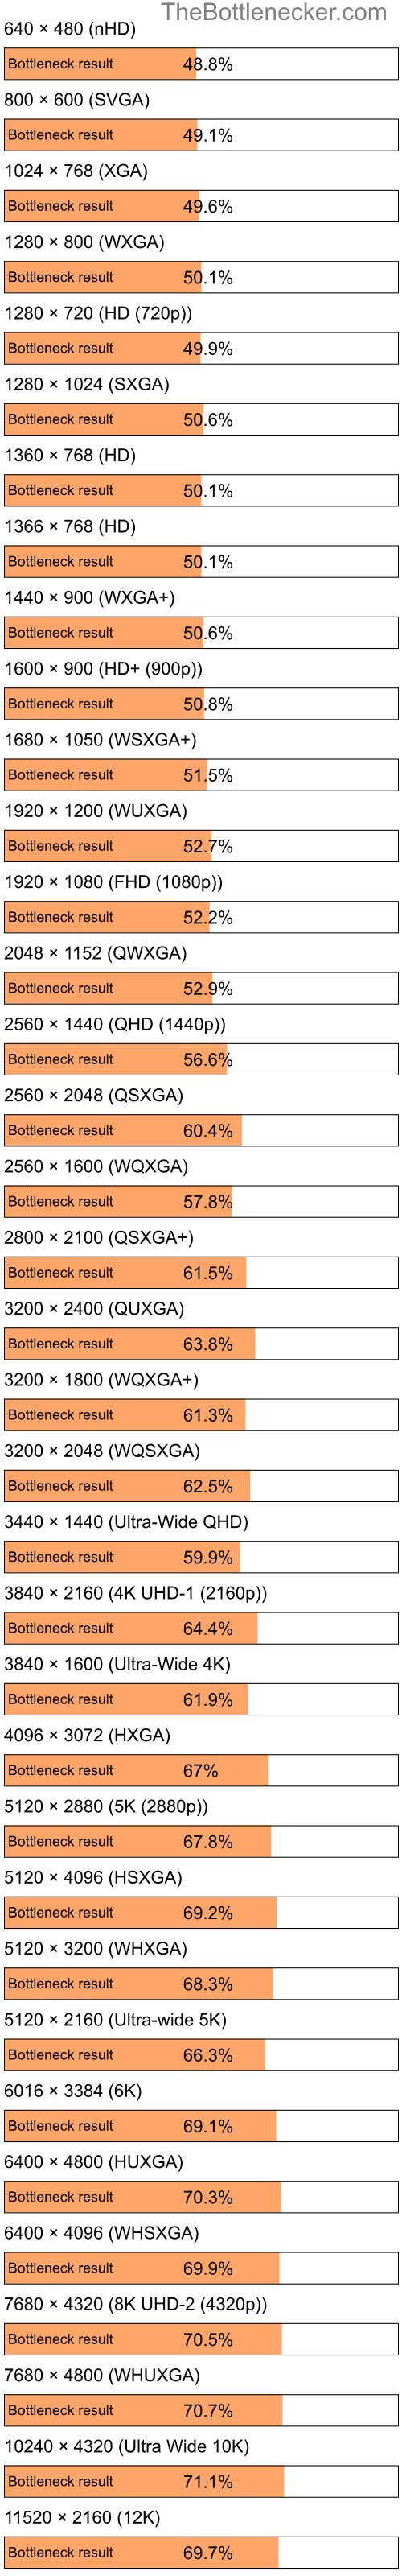 Bottleneck results by resolution for Intel Celeron and AMD Mobility Radeon HD 2400 XT in Processor Intense Tasks